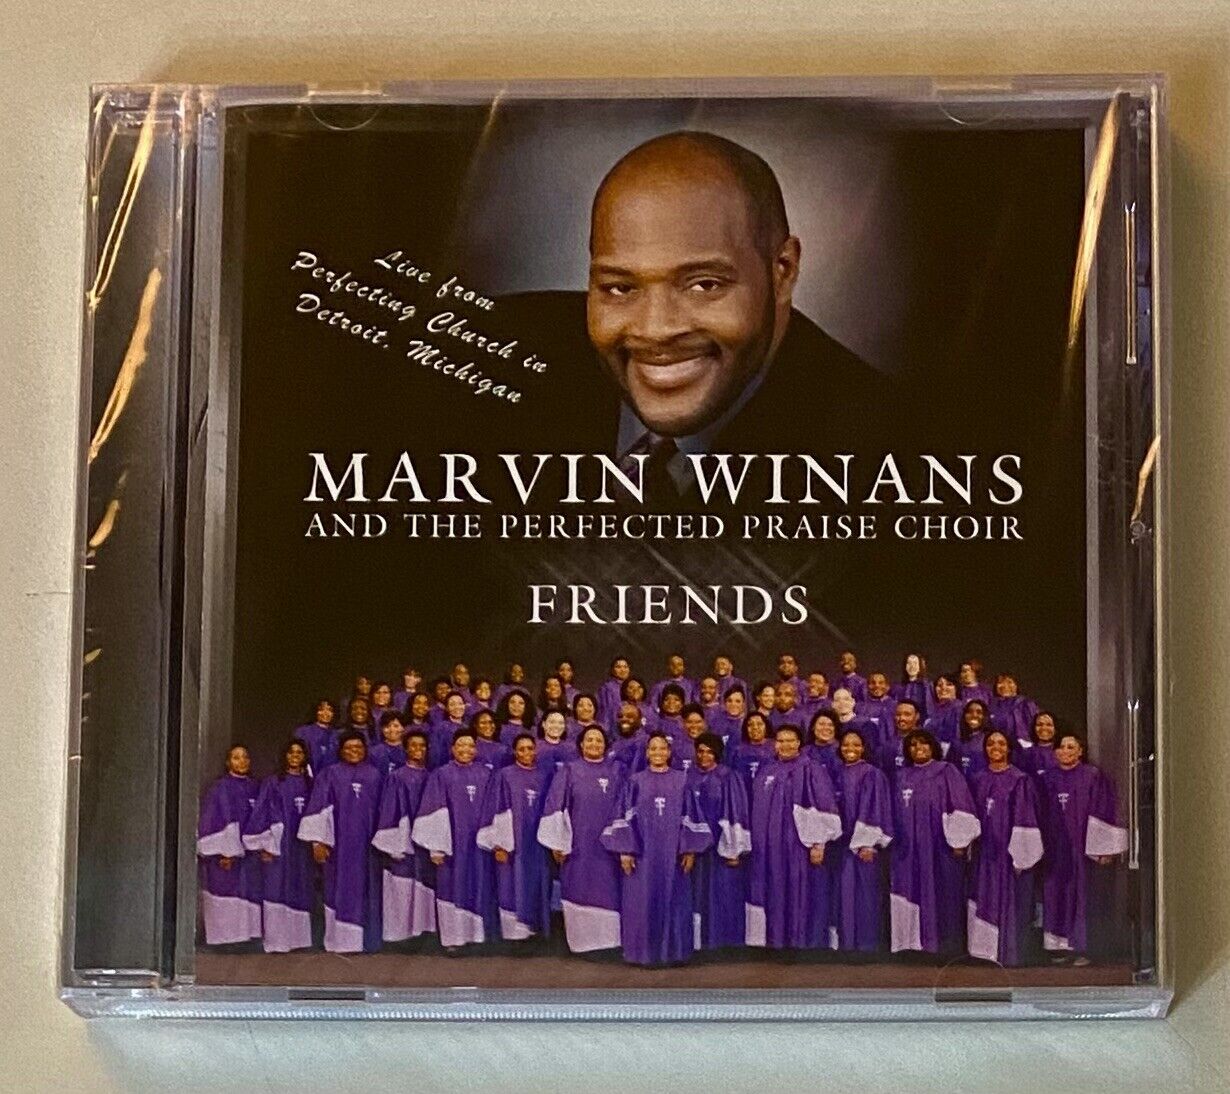 Marvin Winans & The Perfected Praise Choir - Friends - CD - NEW SEALED